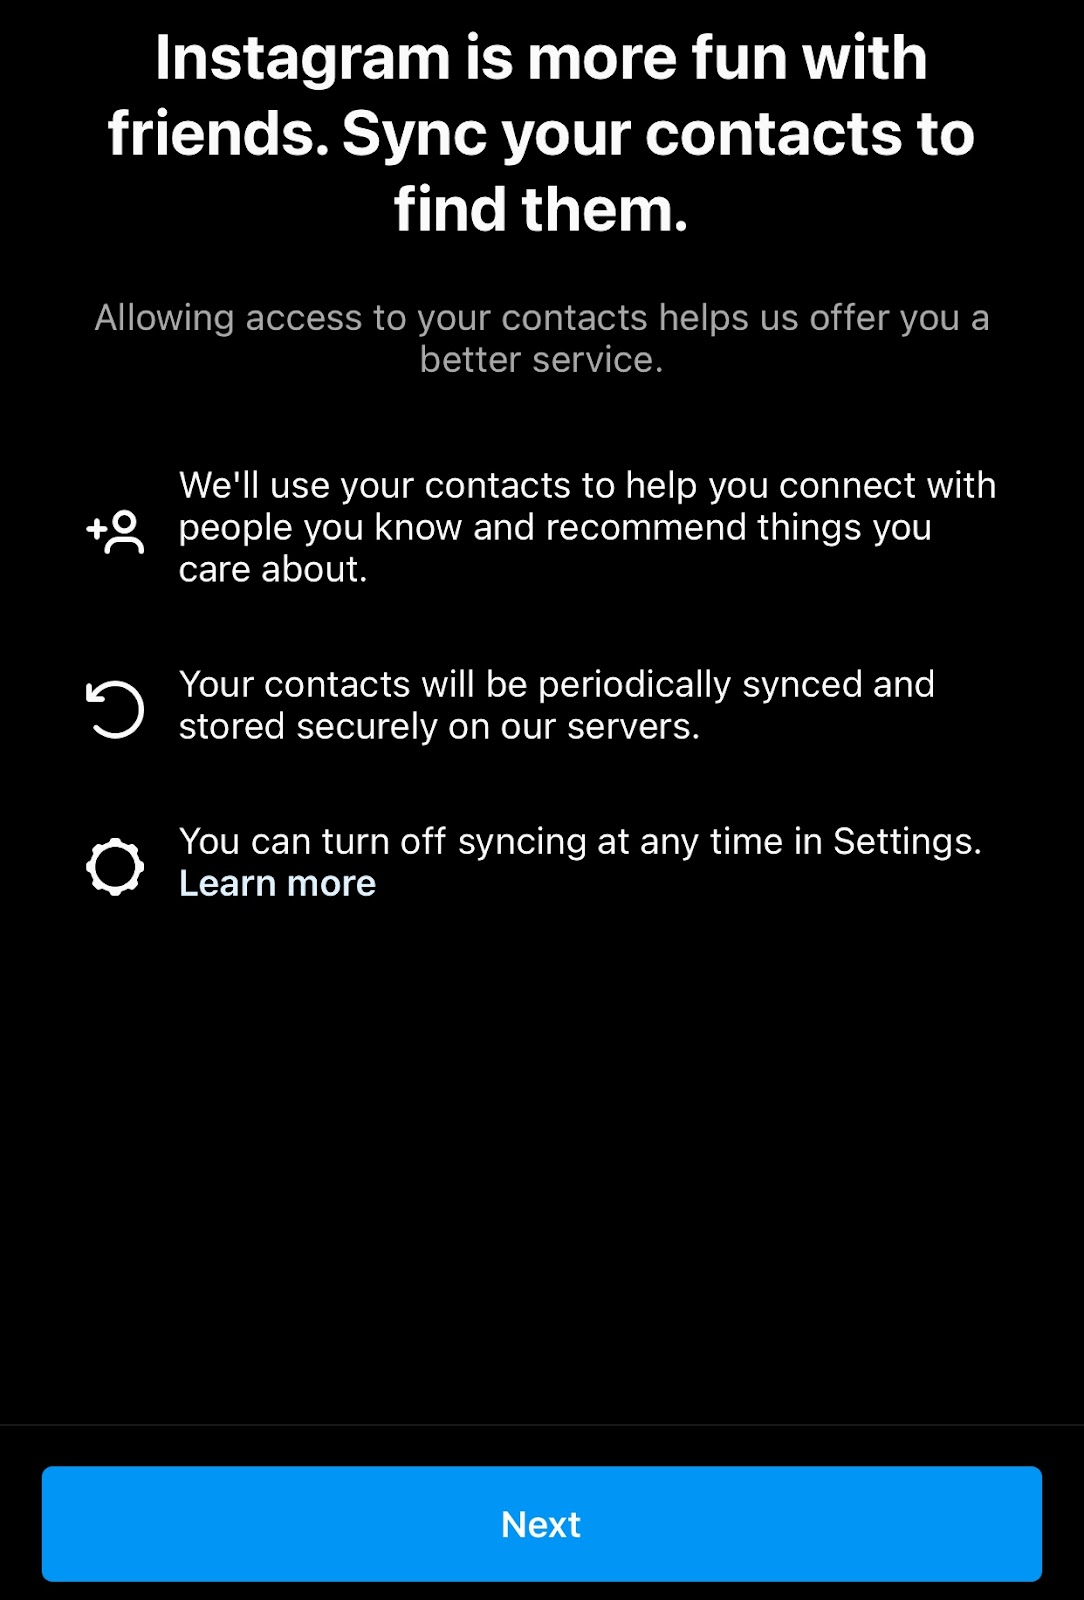 Sync Your Contacts